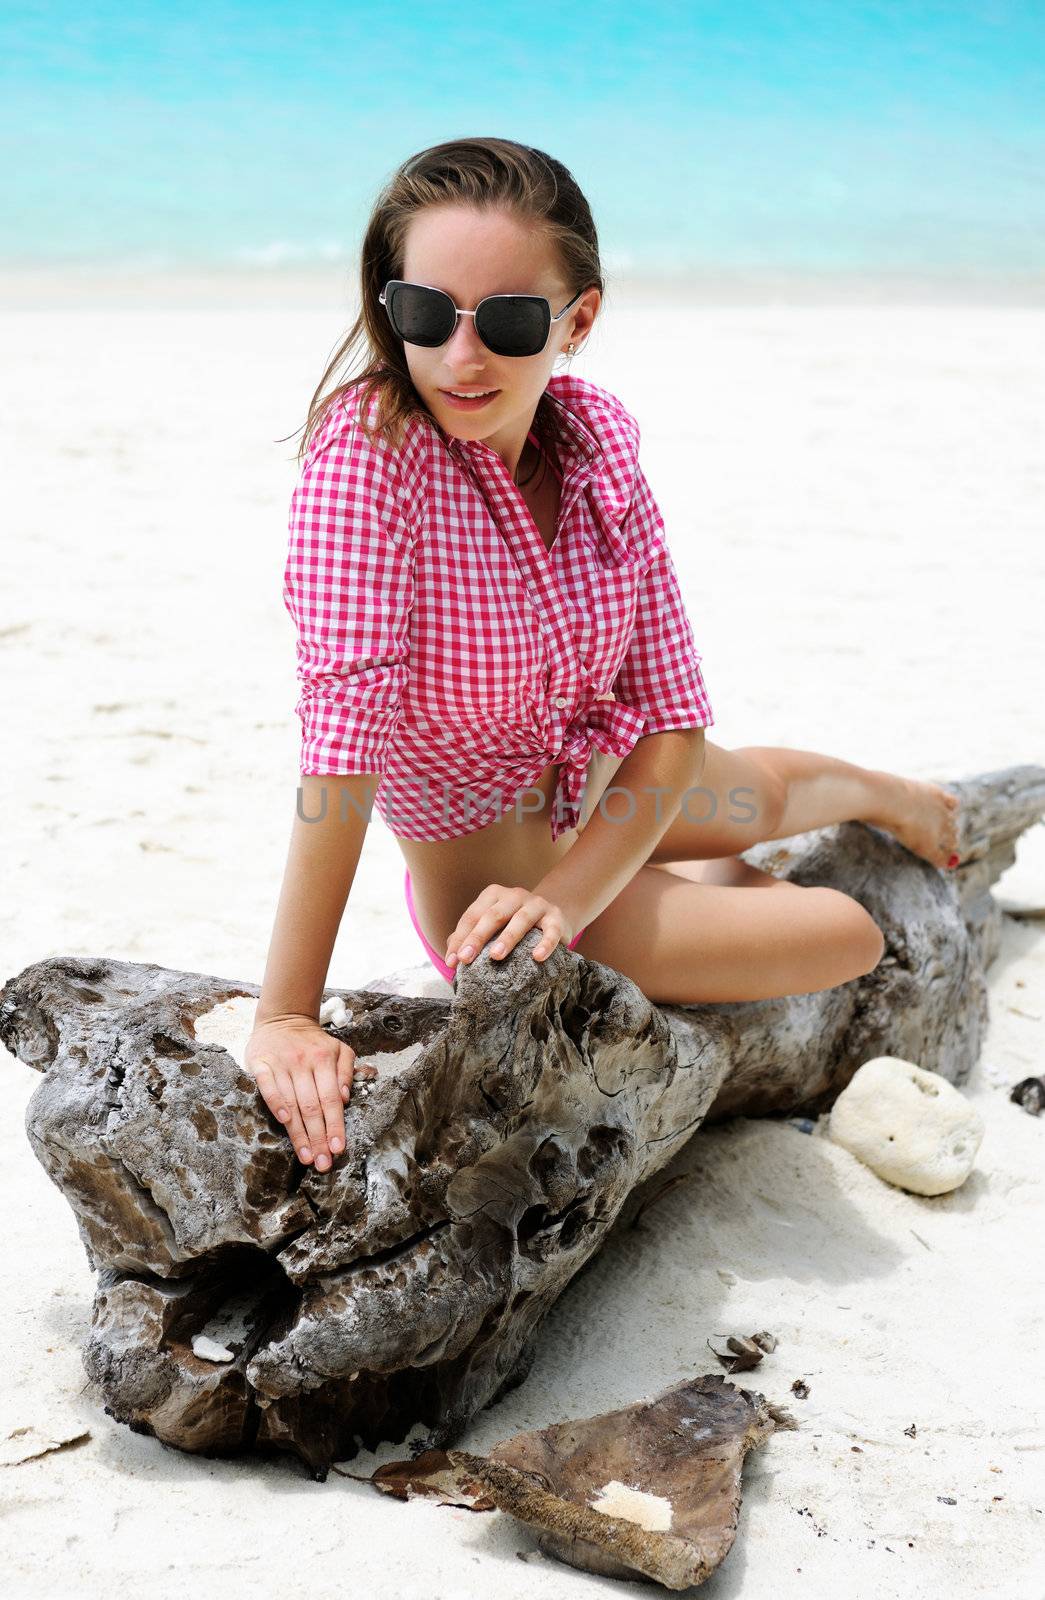 Woman in sunglasses at beach 